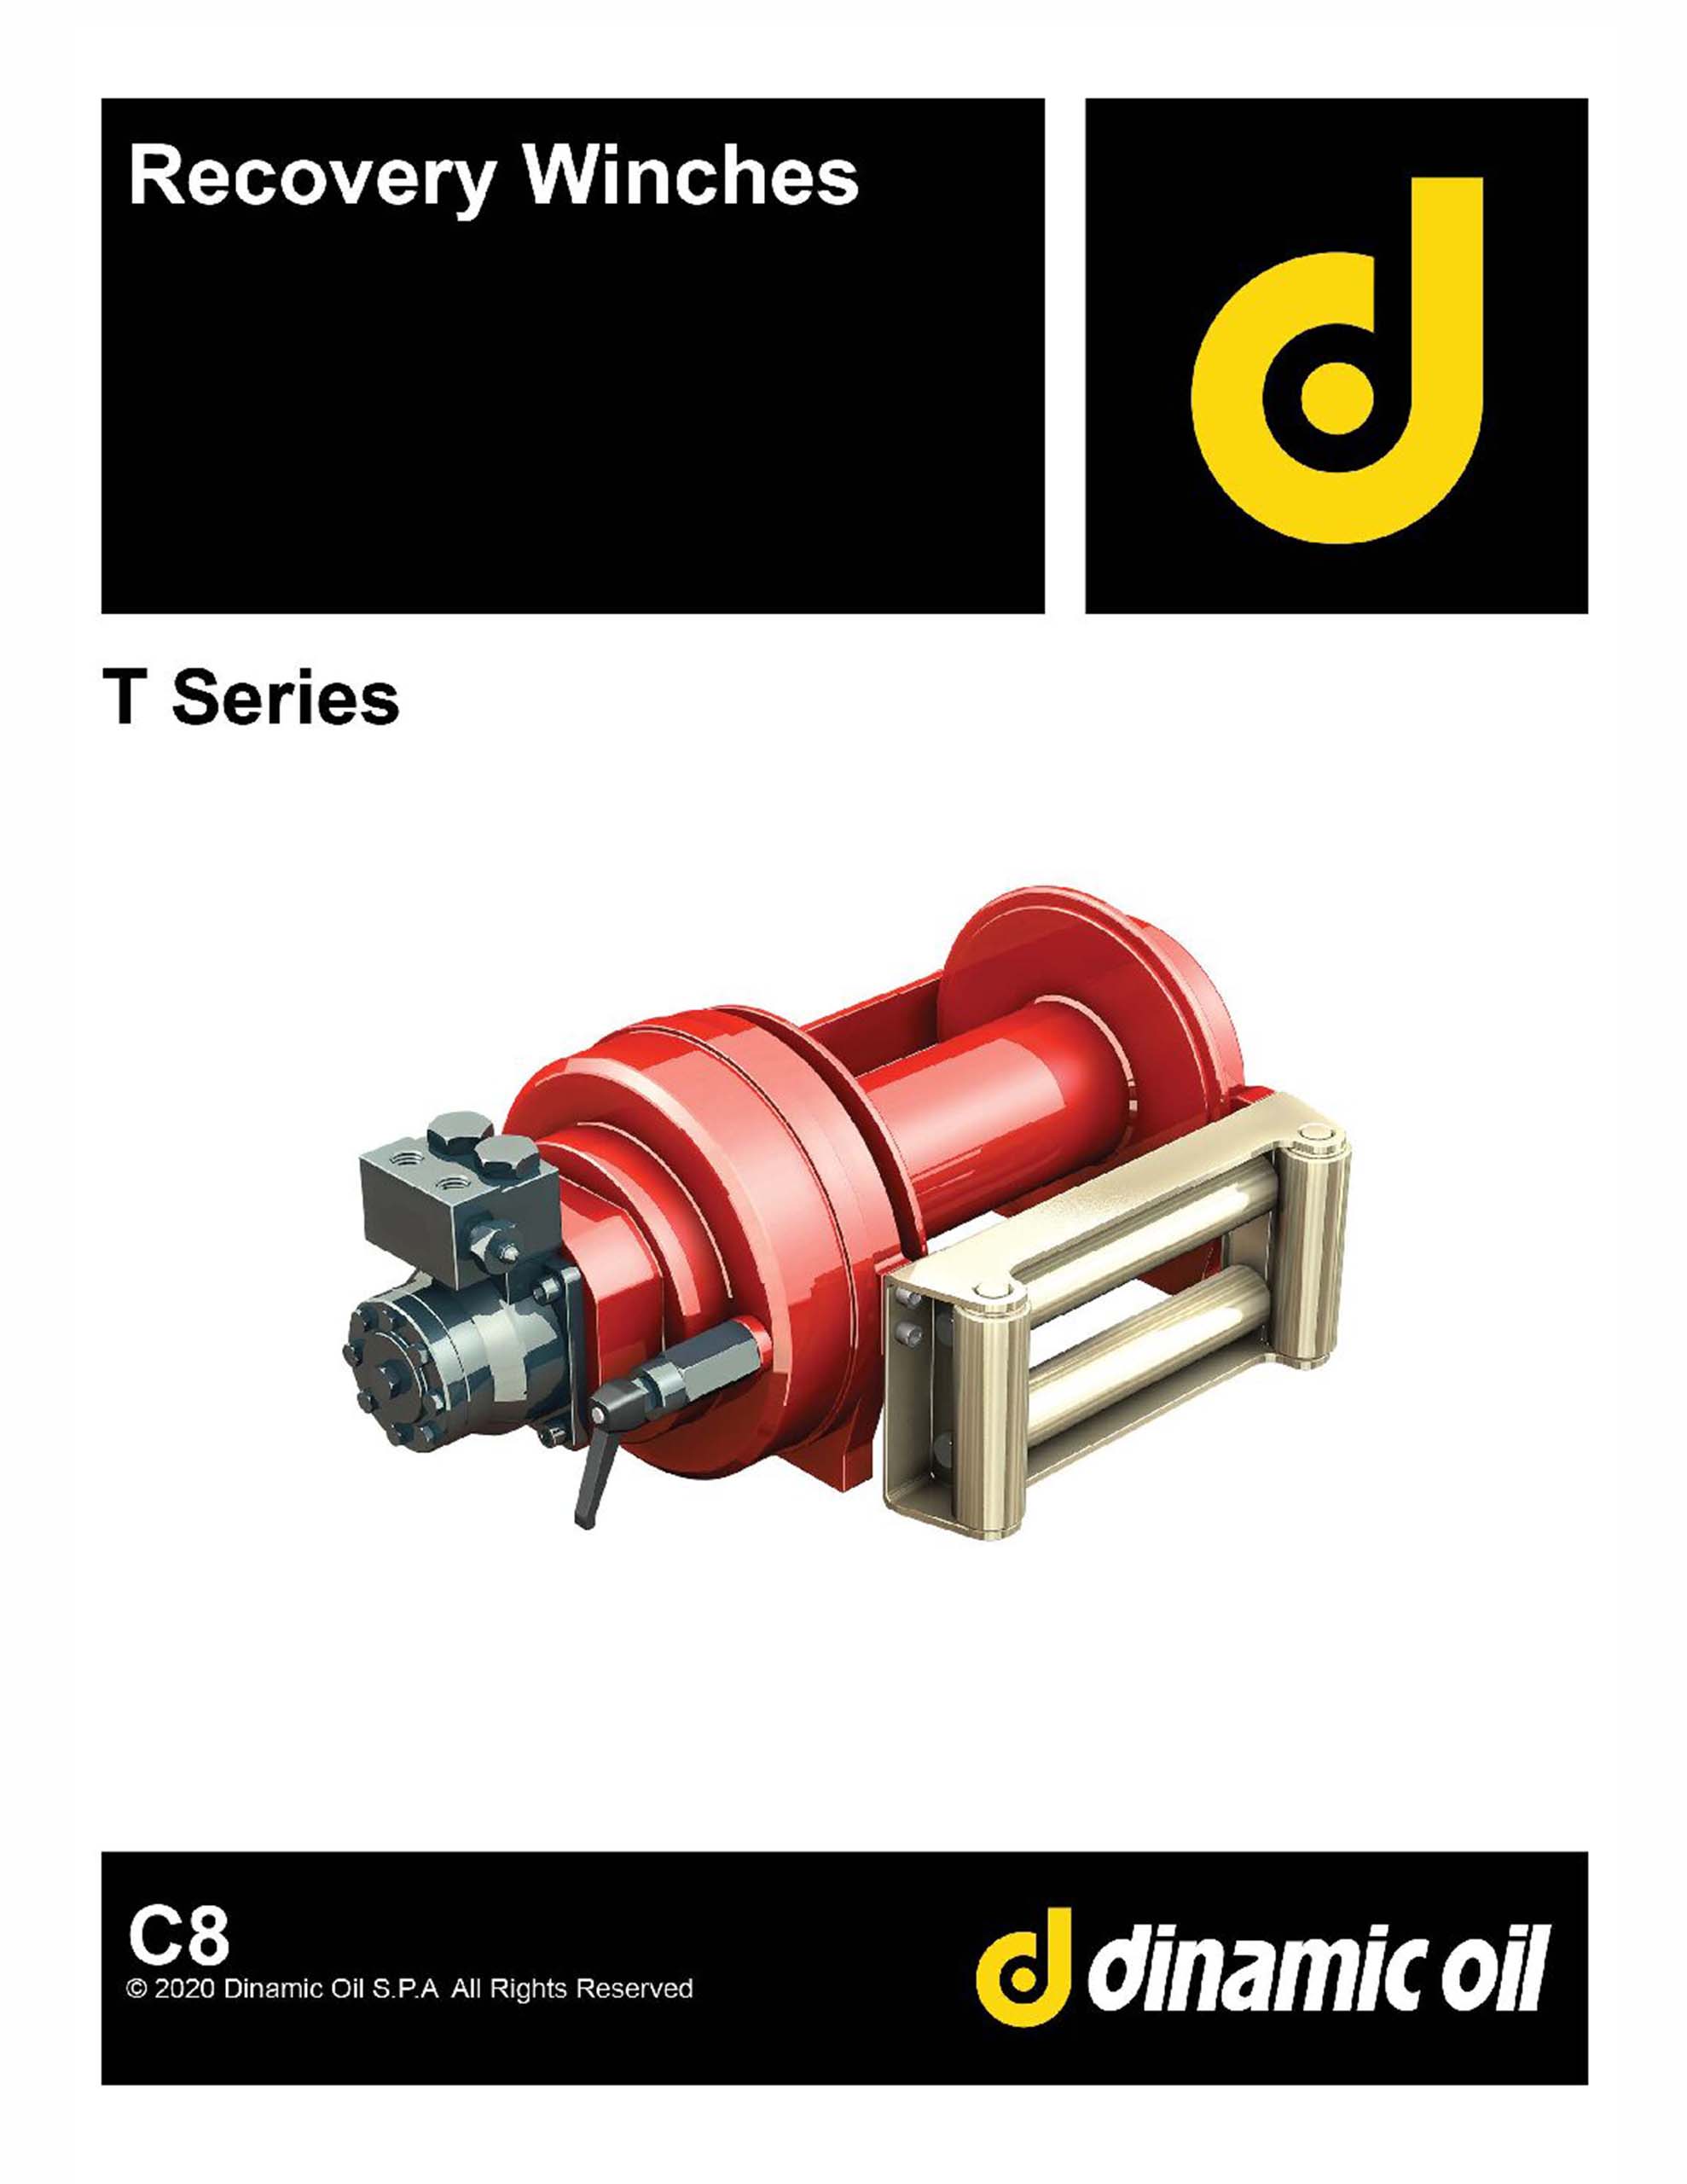 Dinamic Oil Winch Recovery (T Series) Catalog C8